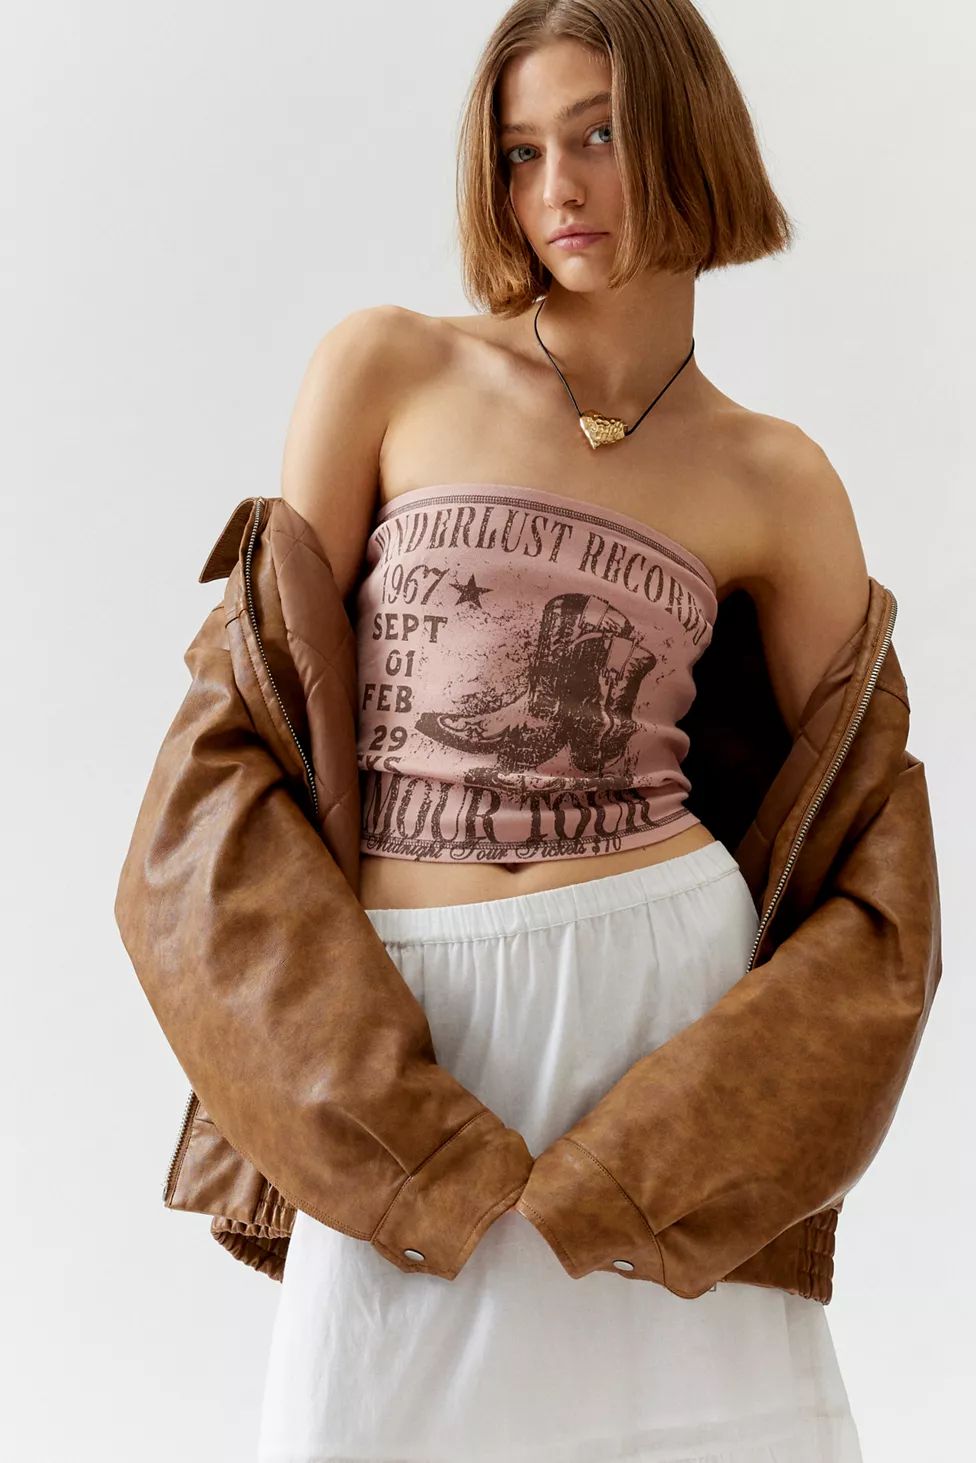 Wanderlust Records Cowboy Boots Tube Top | Urban Outfitters (US and RoW)